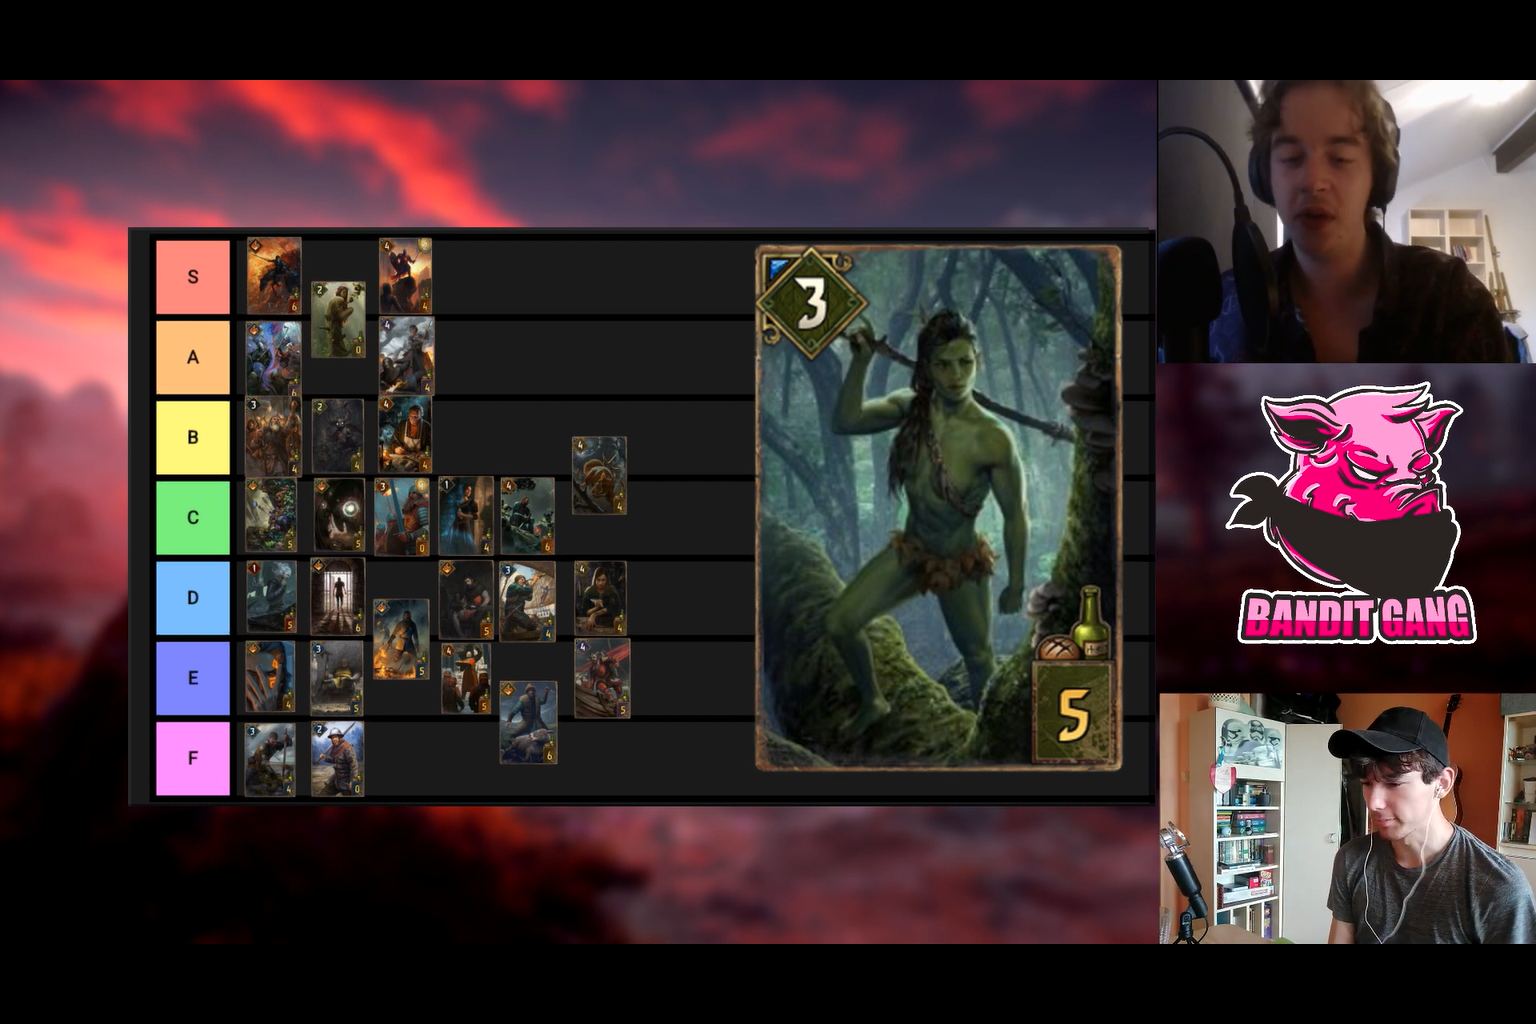 Best playable deck for the first round